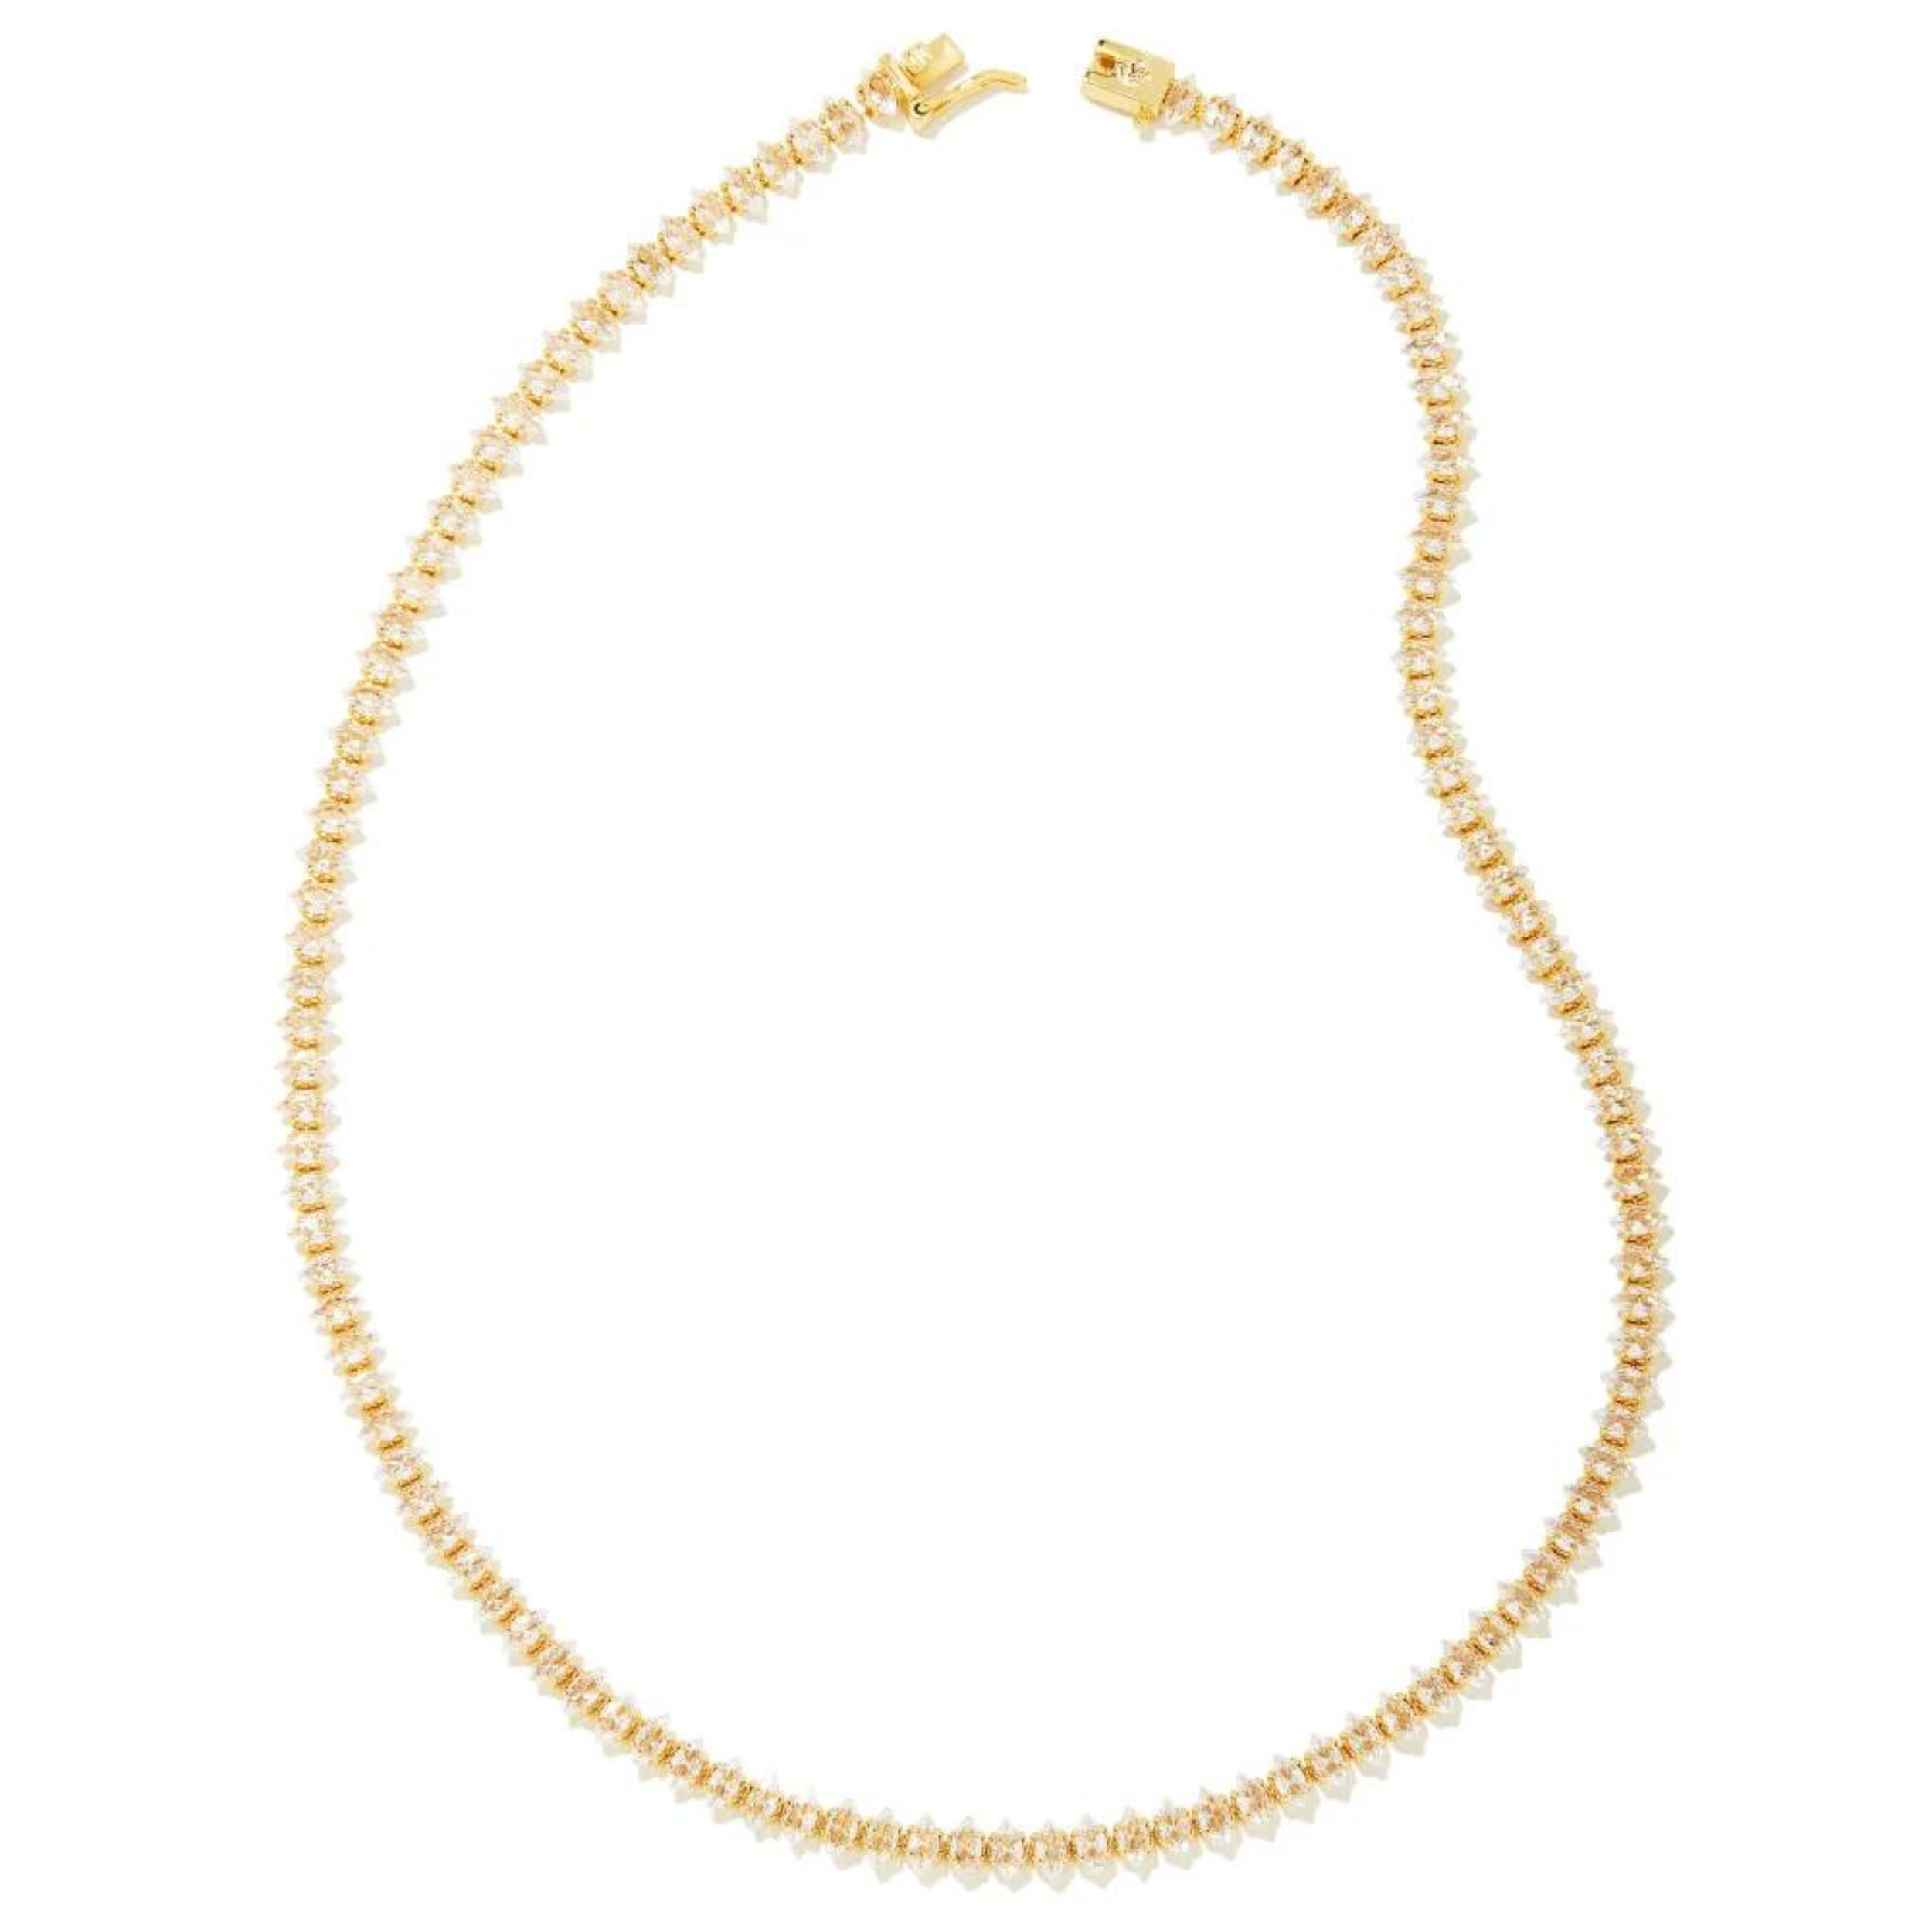 Kendra Scott | Larsan Gold Tennis Necklace in White Crystal - Giddy Up Glamour Boutique